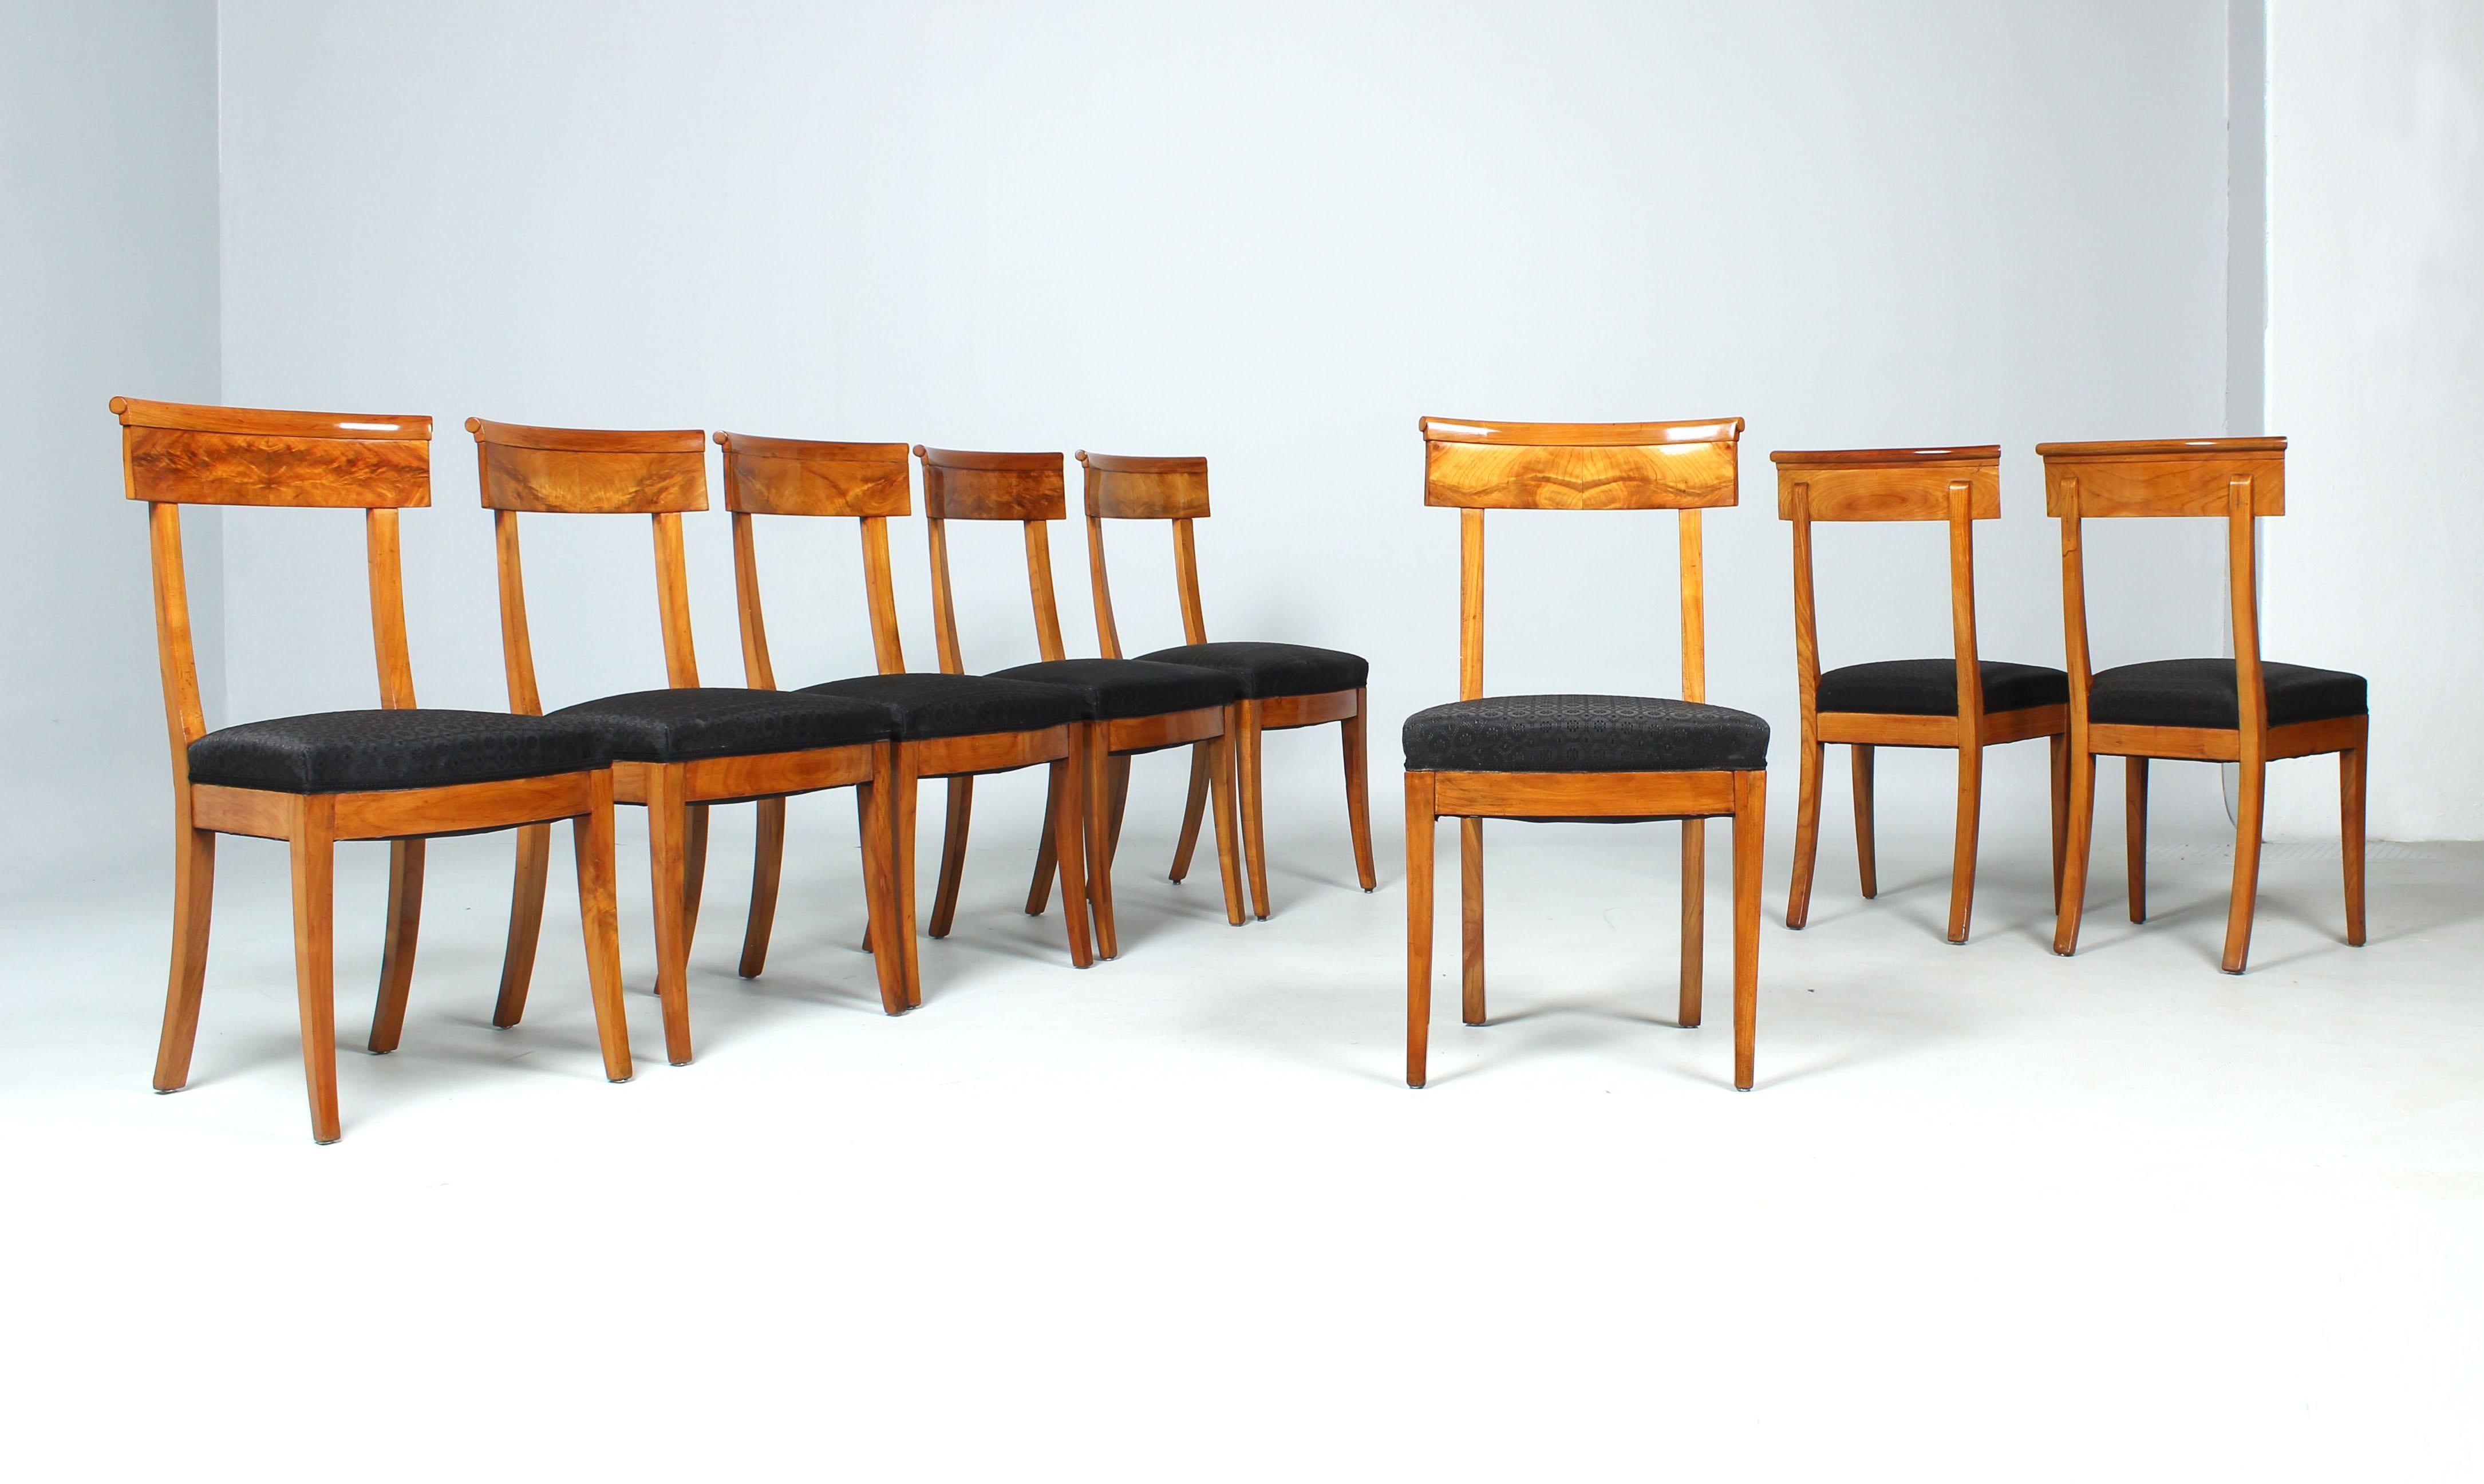 Early 19th Century Biedermeier Chairs, Set of Eight, Cherrywood, Circa 1820 For Sale 7